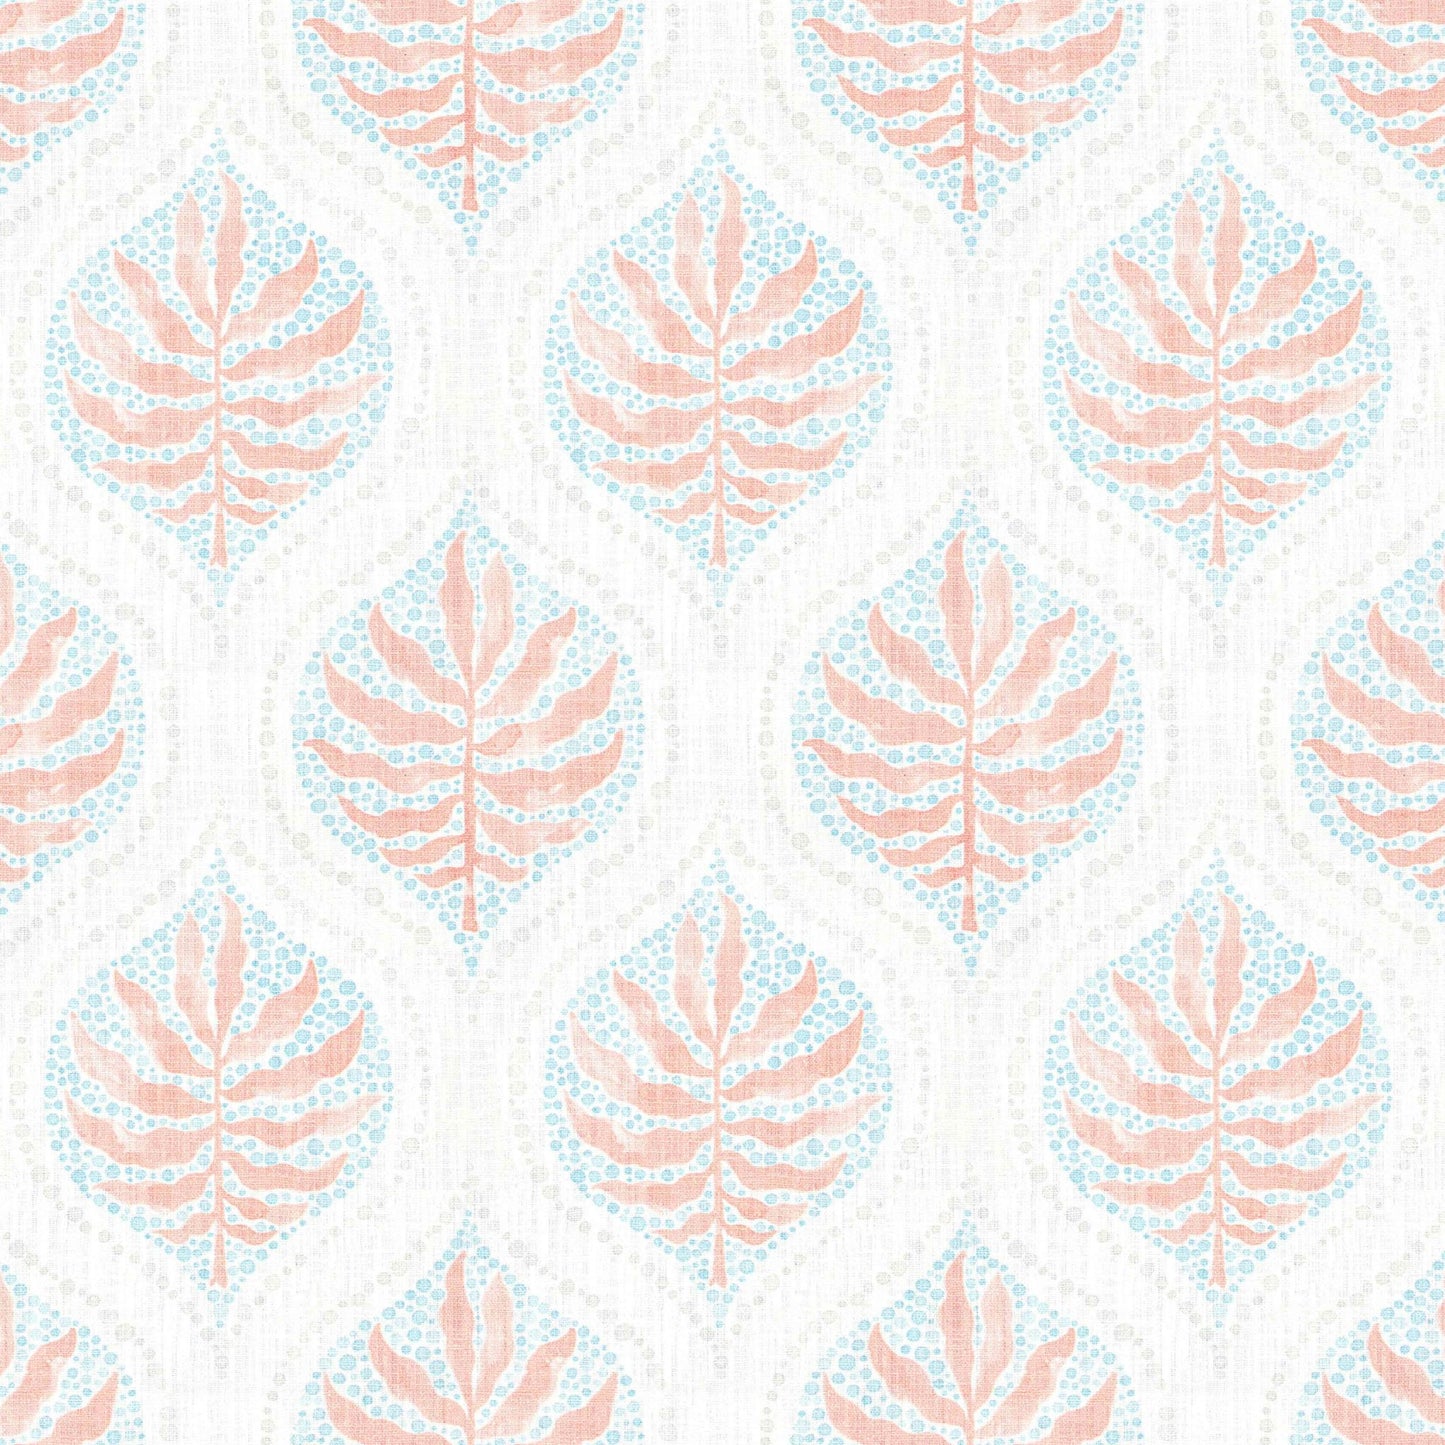 Pillow Sham in Airlie Coral Ogee Floral Watercolor - with Blue, Gray